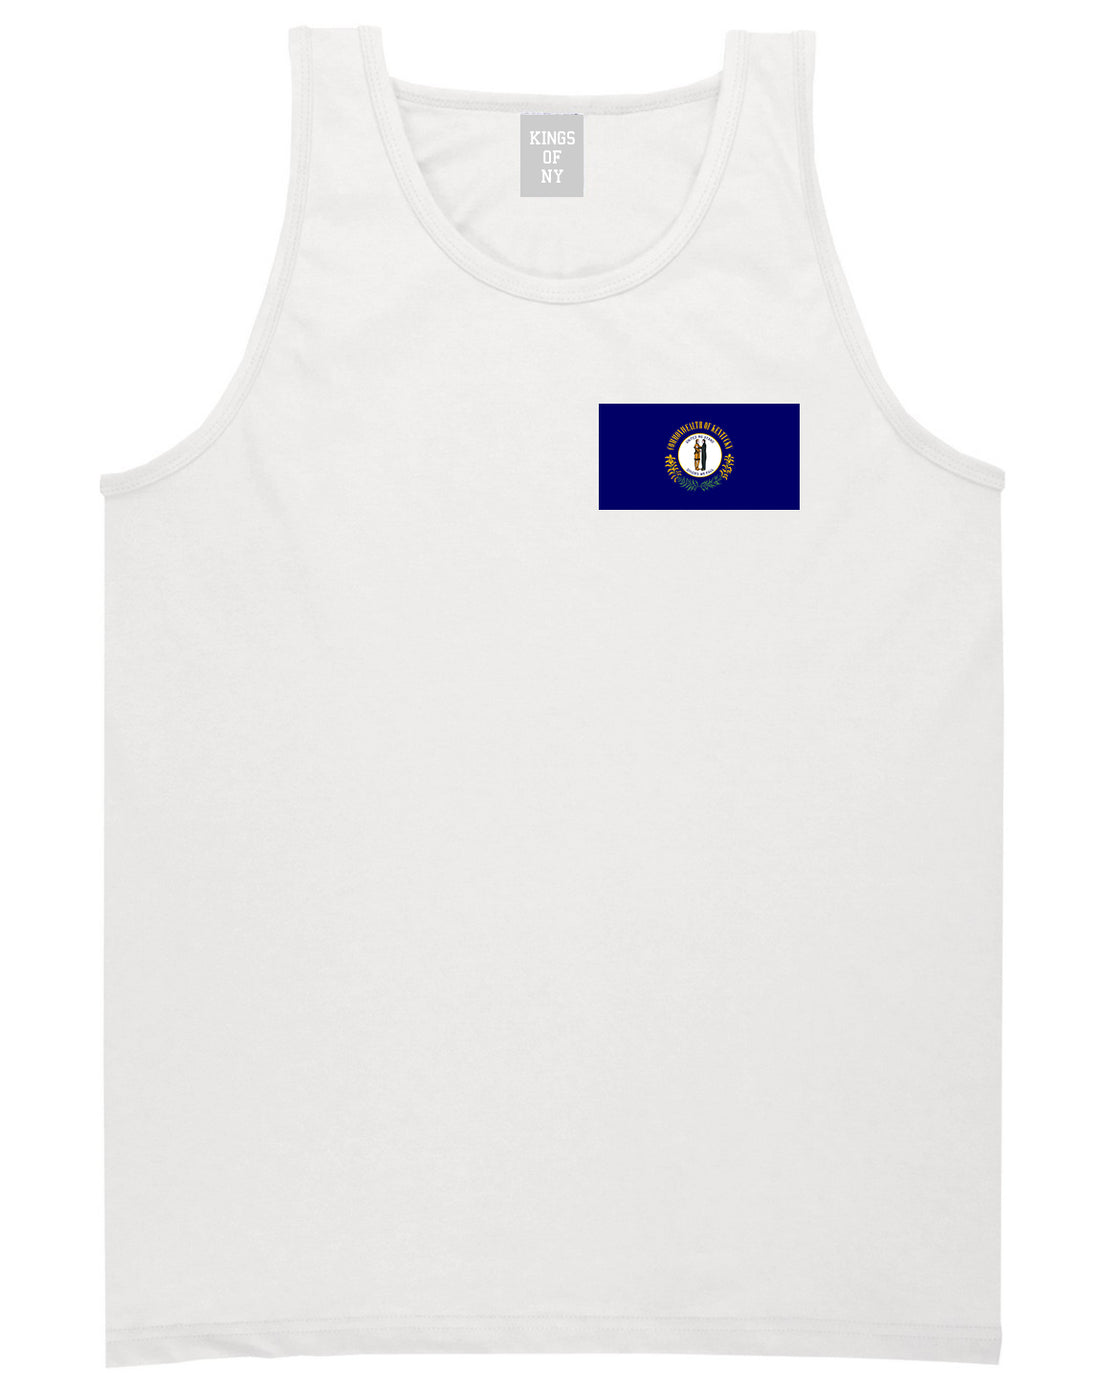 Kentucky State Flag KY Chest Mens Tank Top T-Shirt White